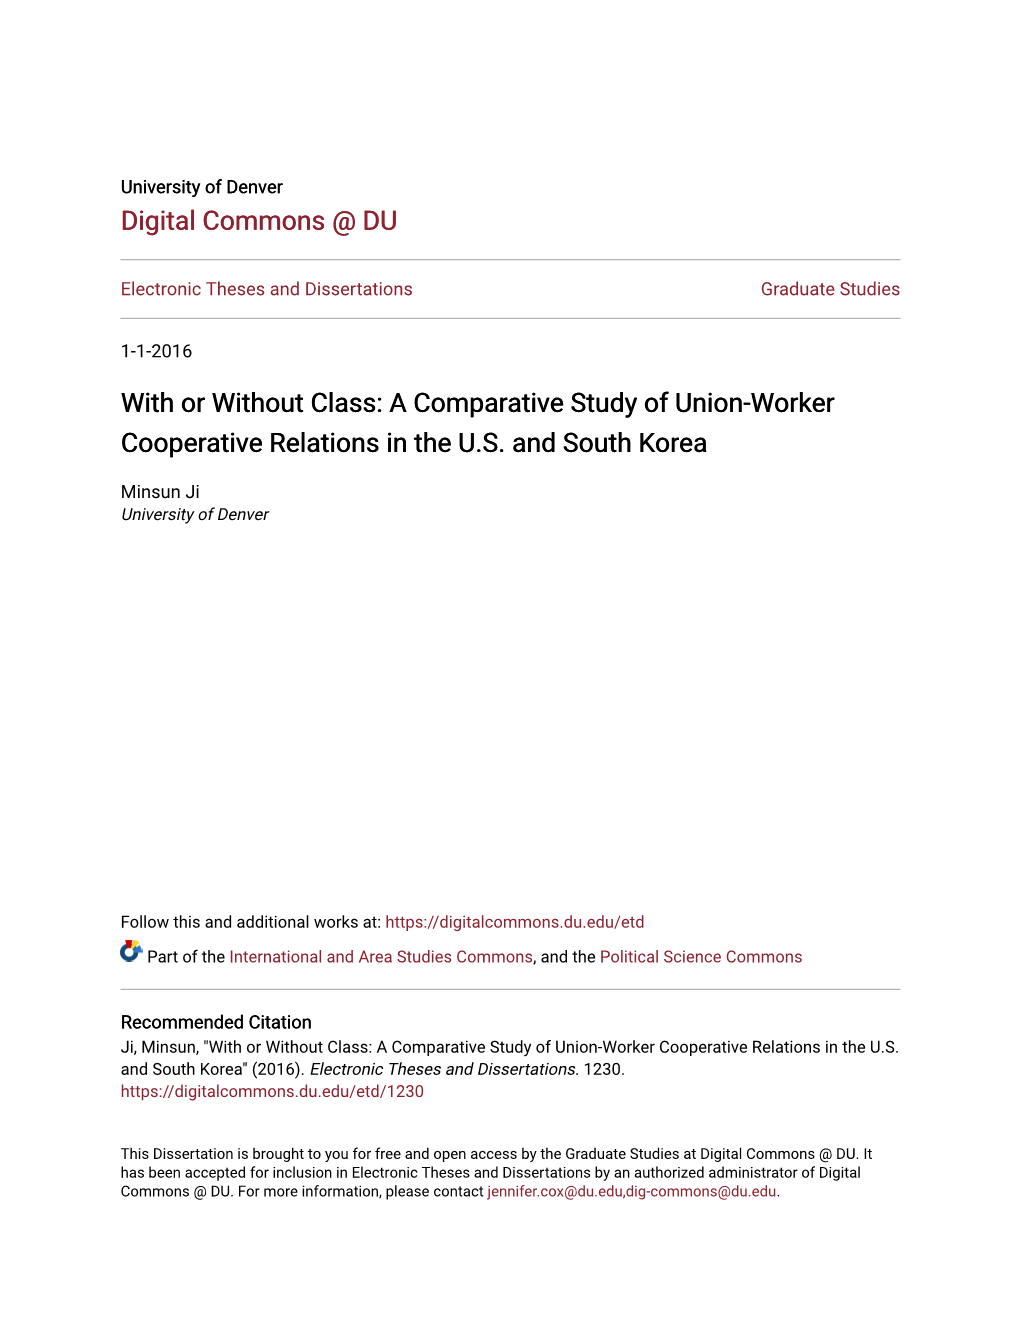 With Or Without Class: a Comparative Study of Union-Worker Cooperative Relations in the U.S